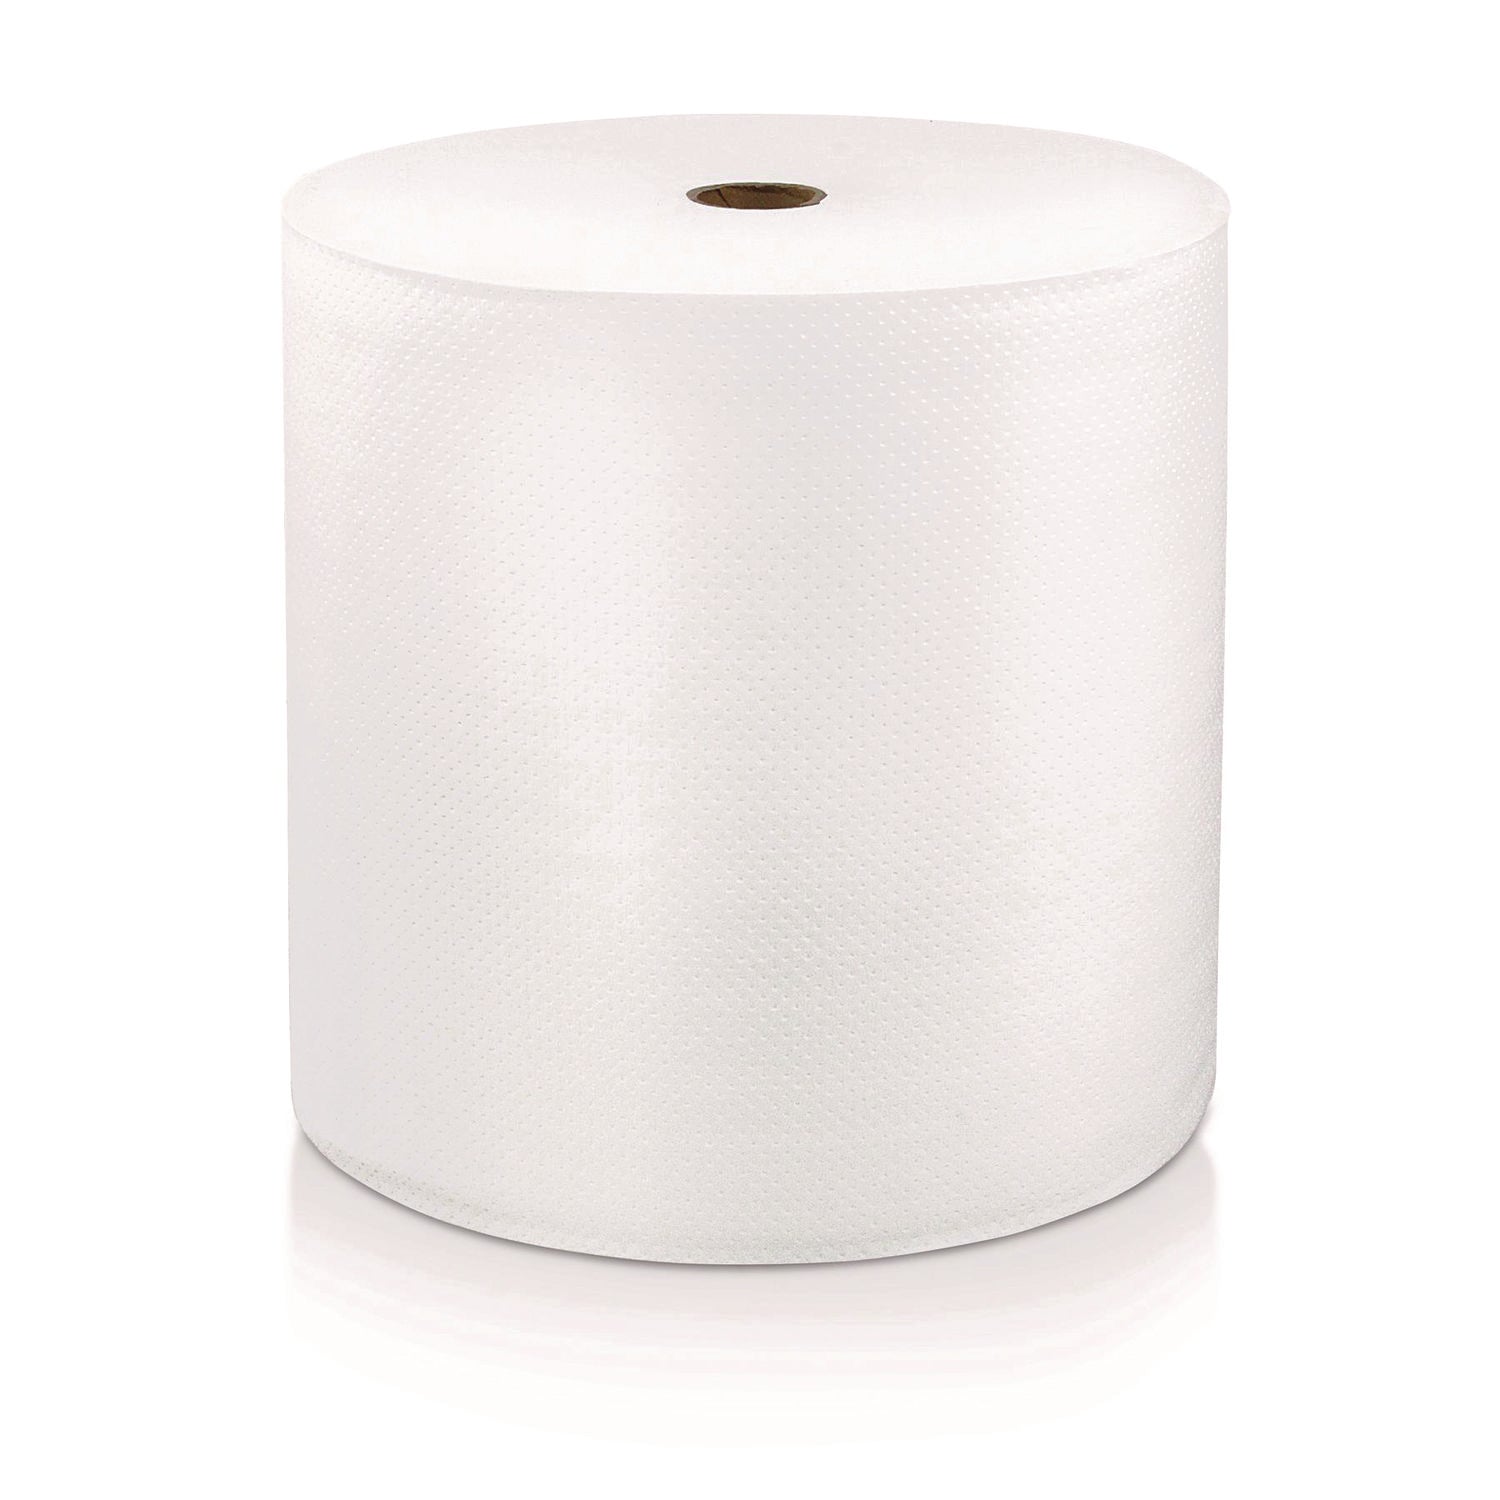 LoCor Hardwound Roll Towels - 1 Ply - 8" x 1000 ft - Bright White - Fiber - Eco-friendly, Soft, Absorbent, Strong - For Hand - 6 / Carton - 1